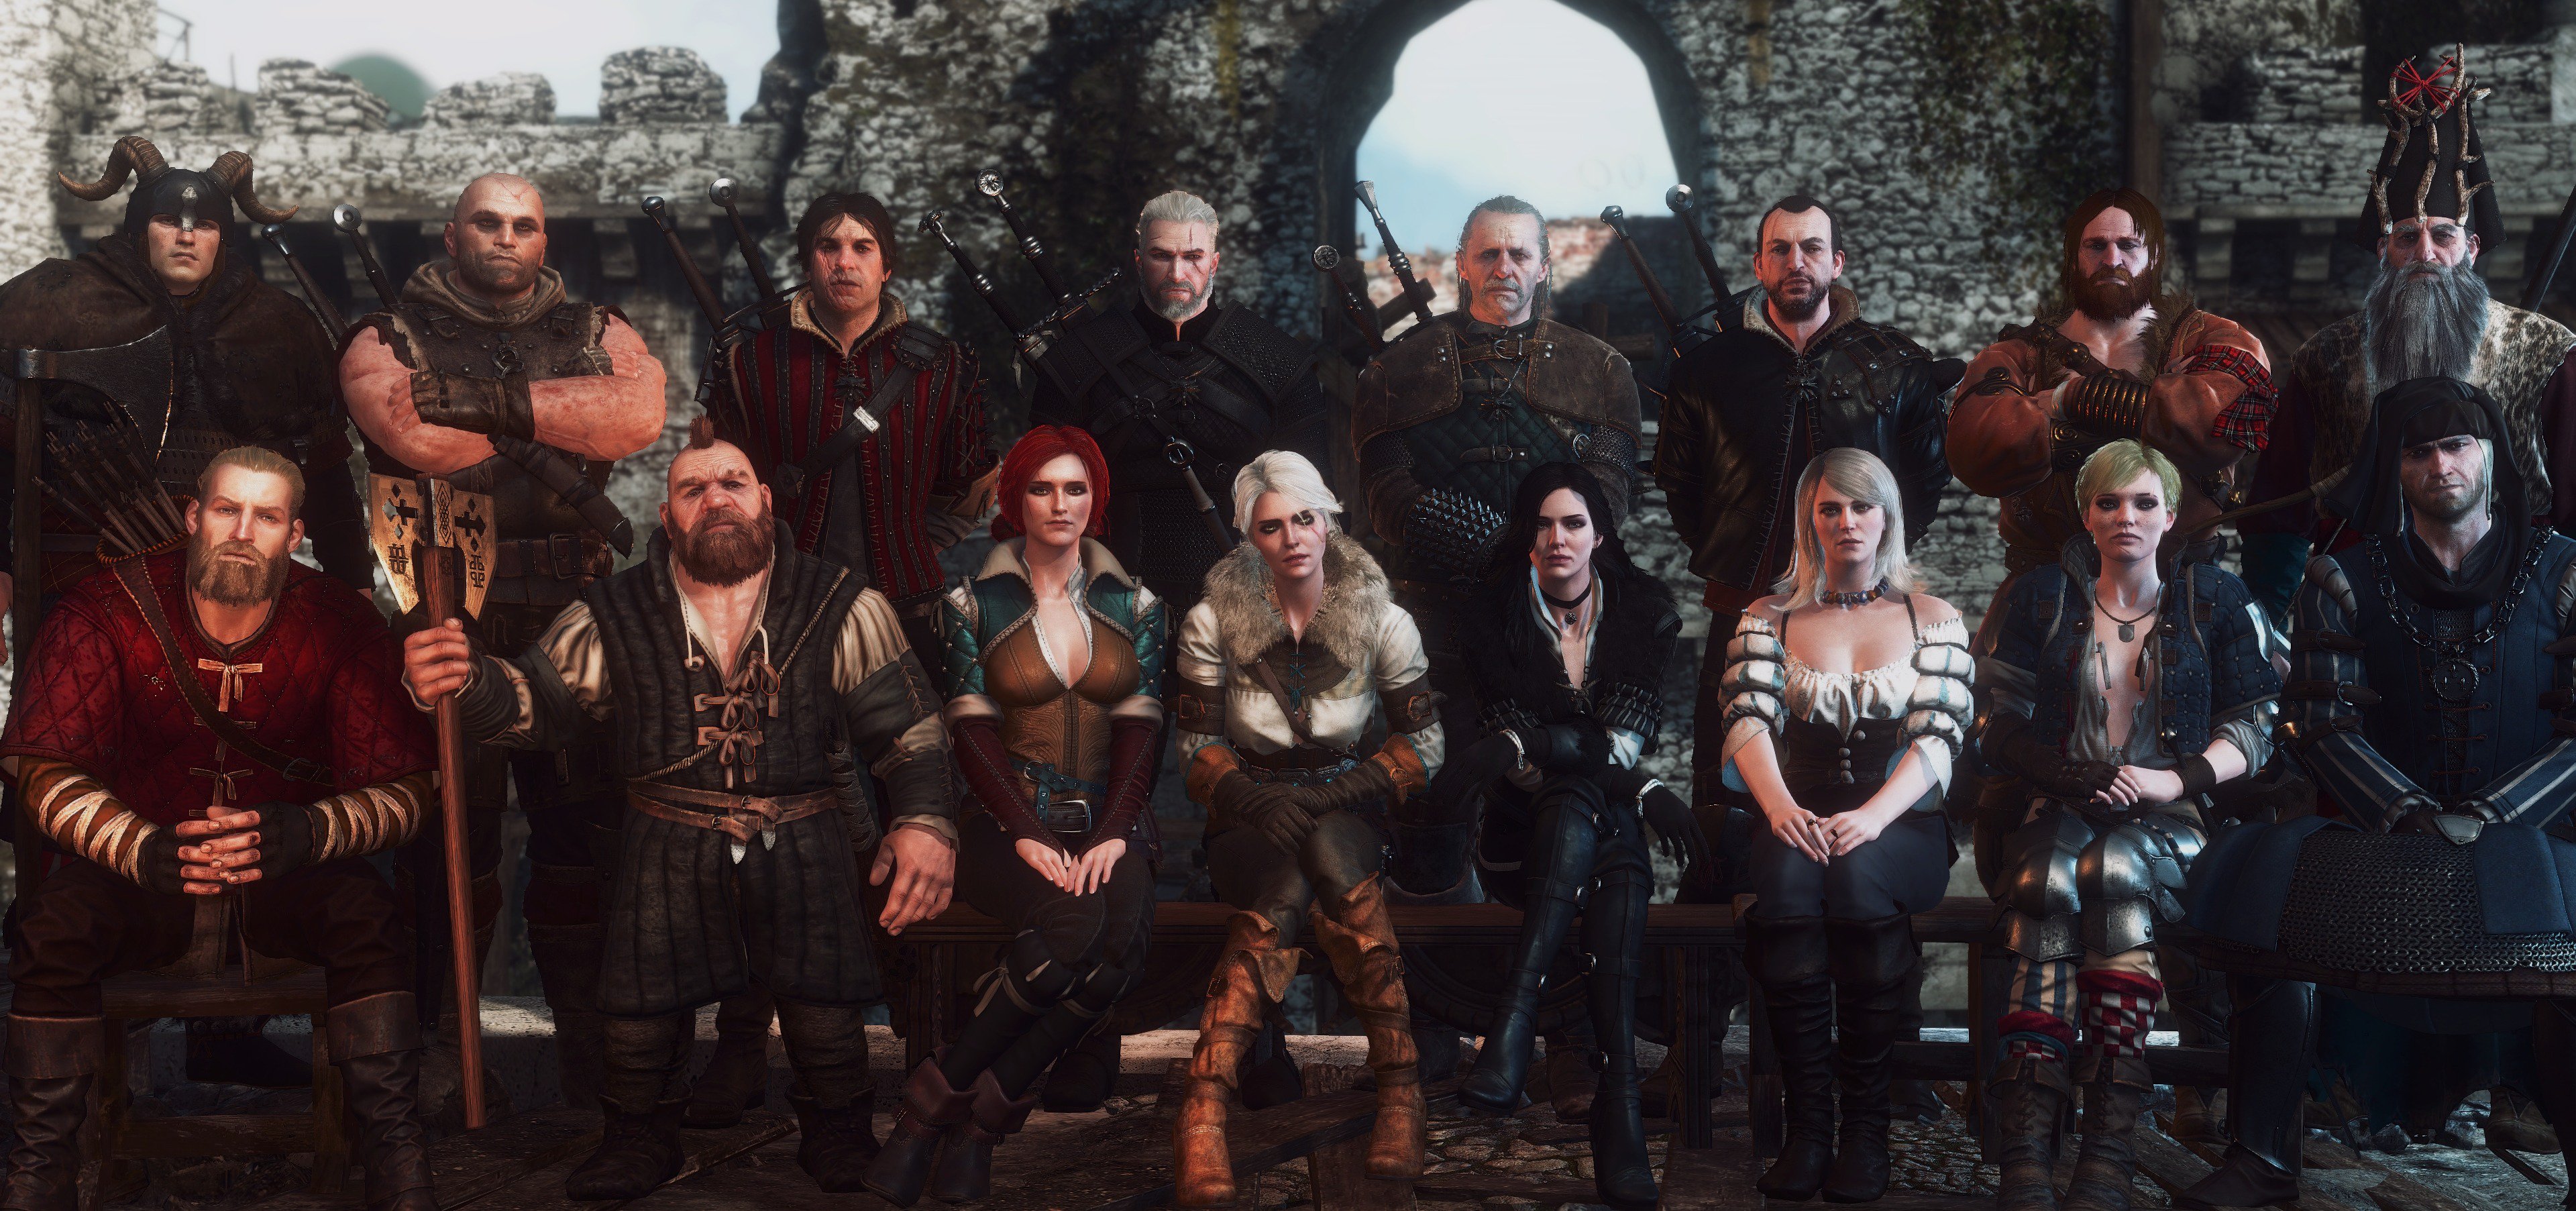 the-witcher-the-witcher-3-wild-hunt-group-of-people-kaer-morhen-geralt